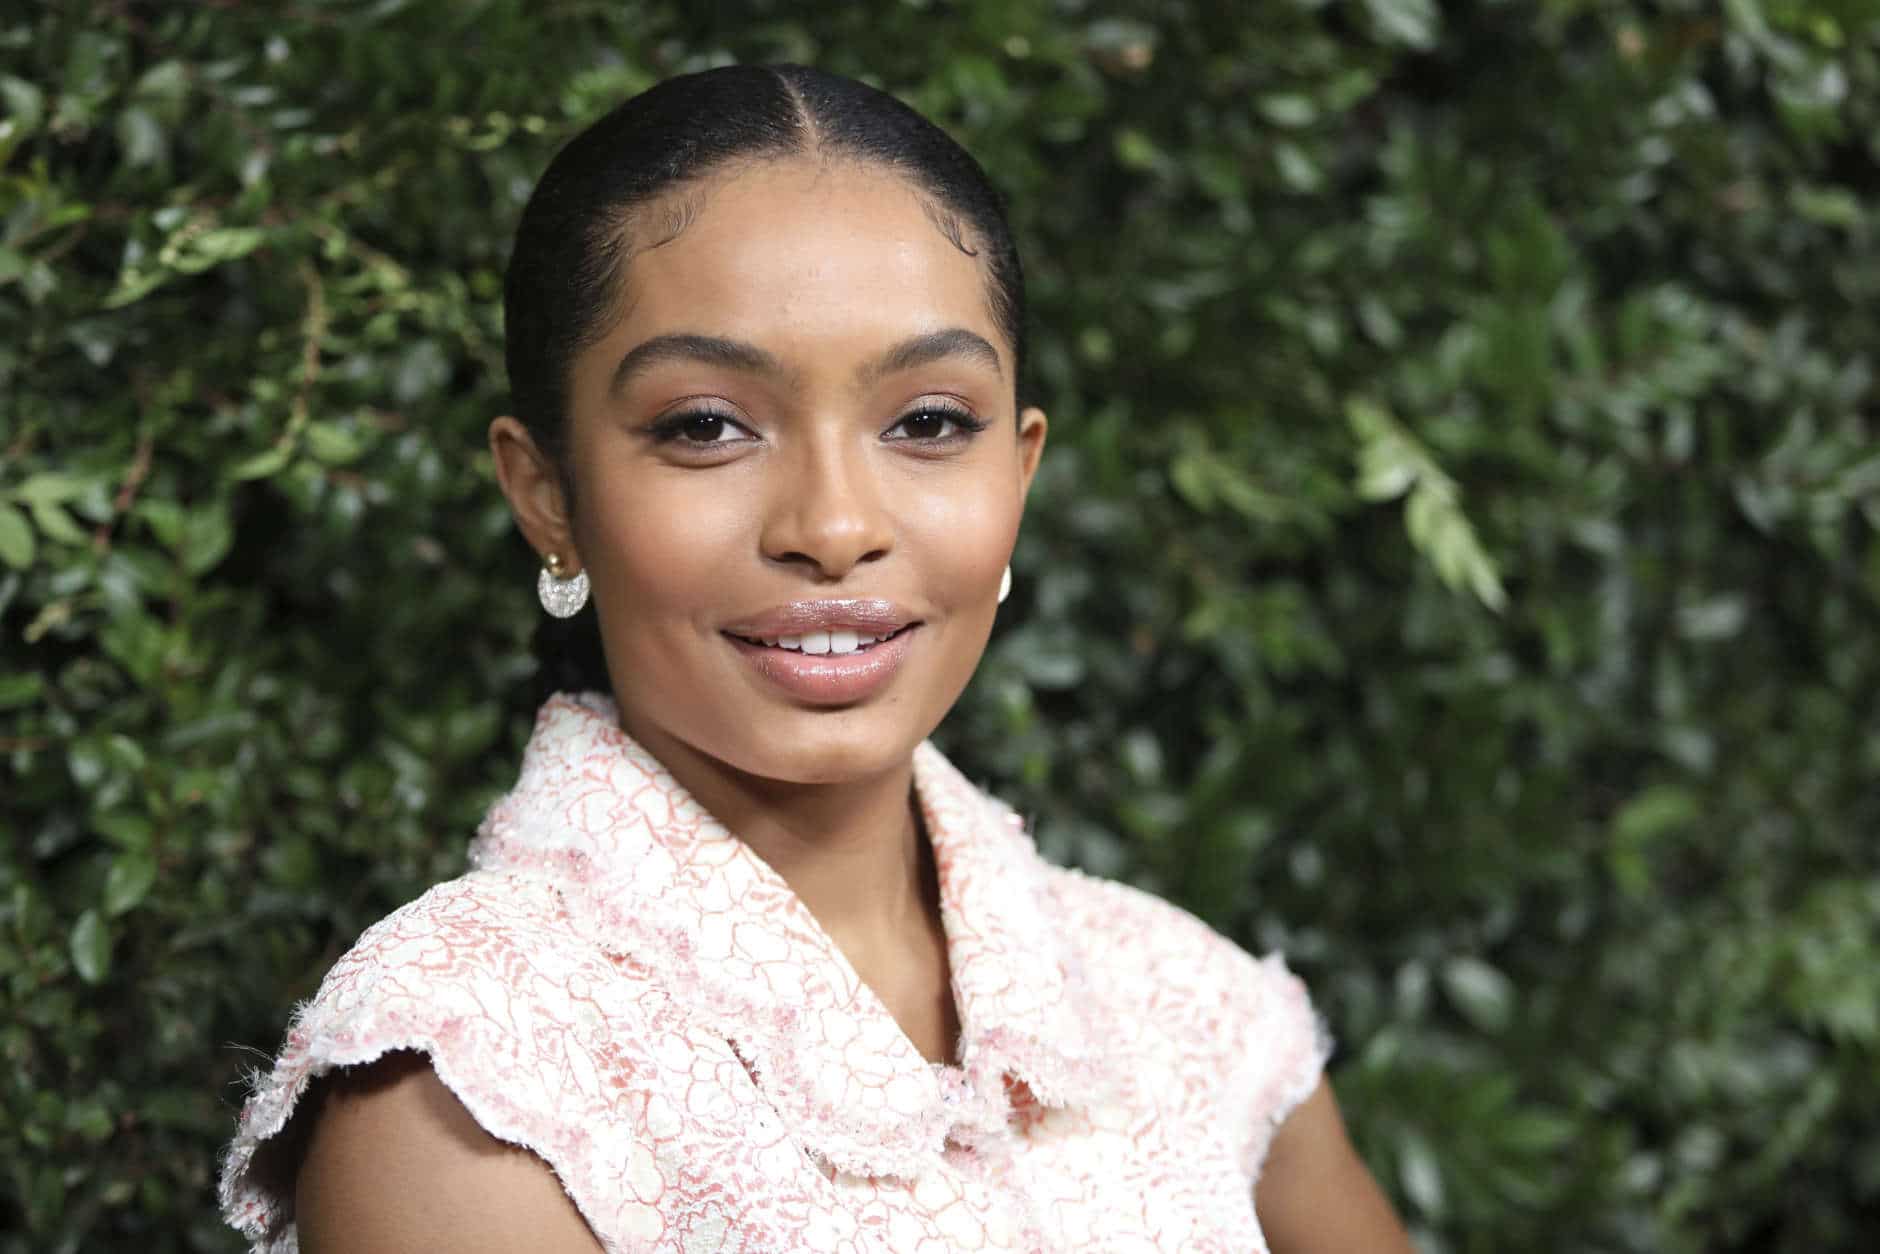 Yara Shahidi arrives at the CHANEL Pre-Oscar Dinner at Madeo Restaurant on Saturday, March 3, 2018, in Los Angeles. (Photo by Omar Vega/Invision/AP)